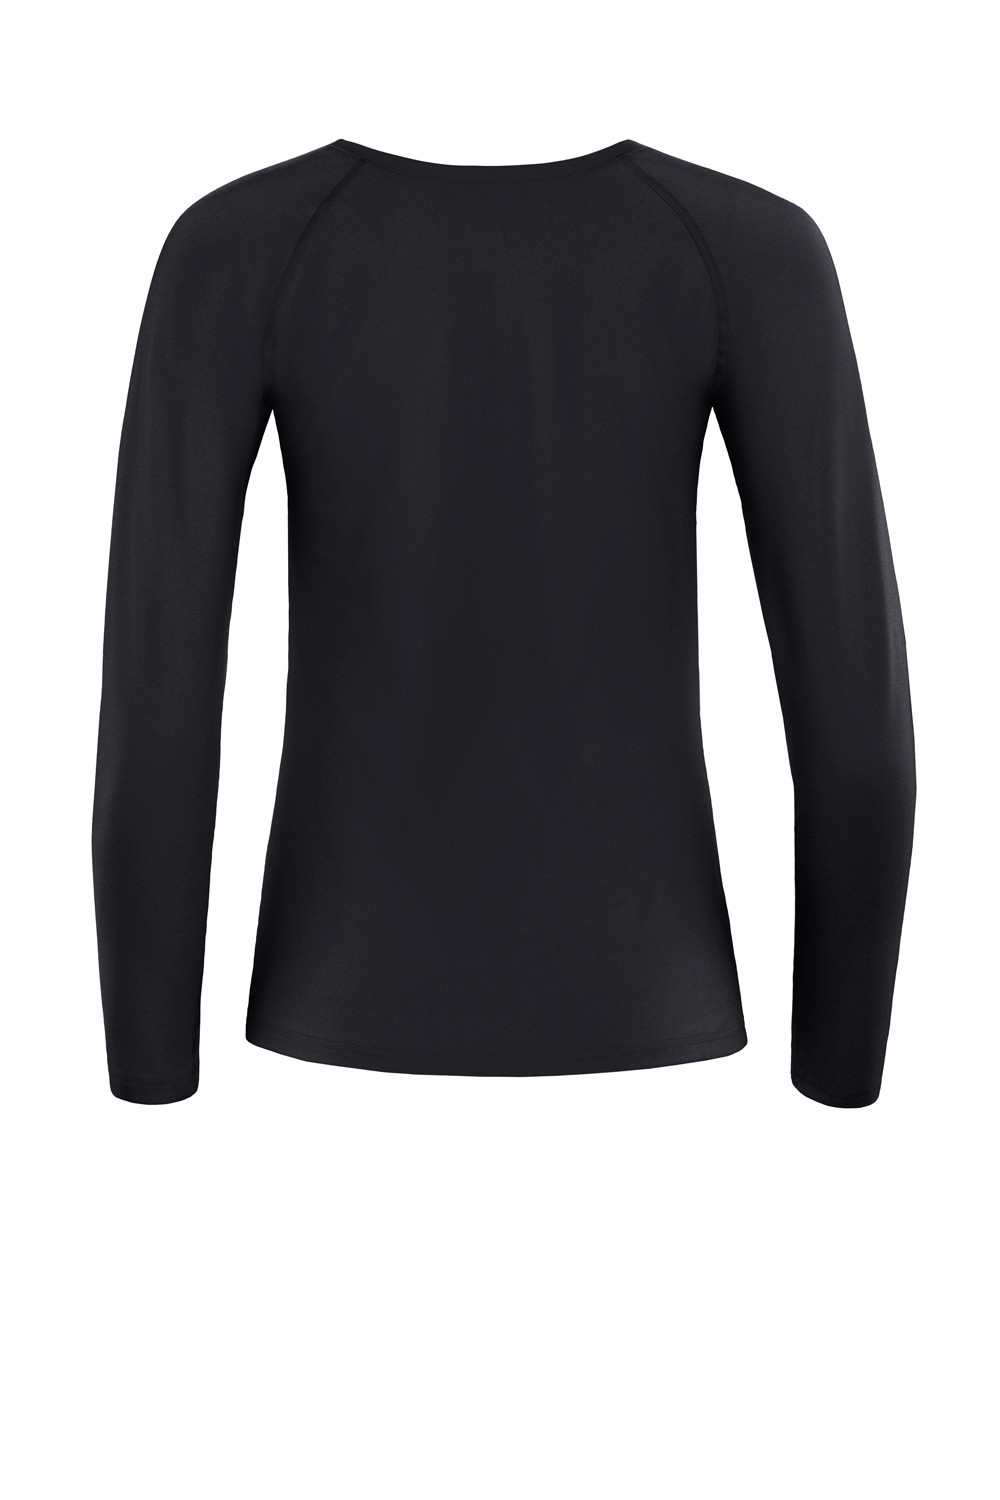 Functional Light Soft Top Soft Sleeve Long Style and schwarz, Winshape AET118LS, Ultra